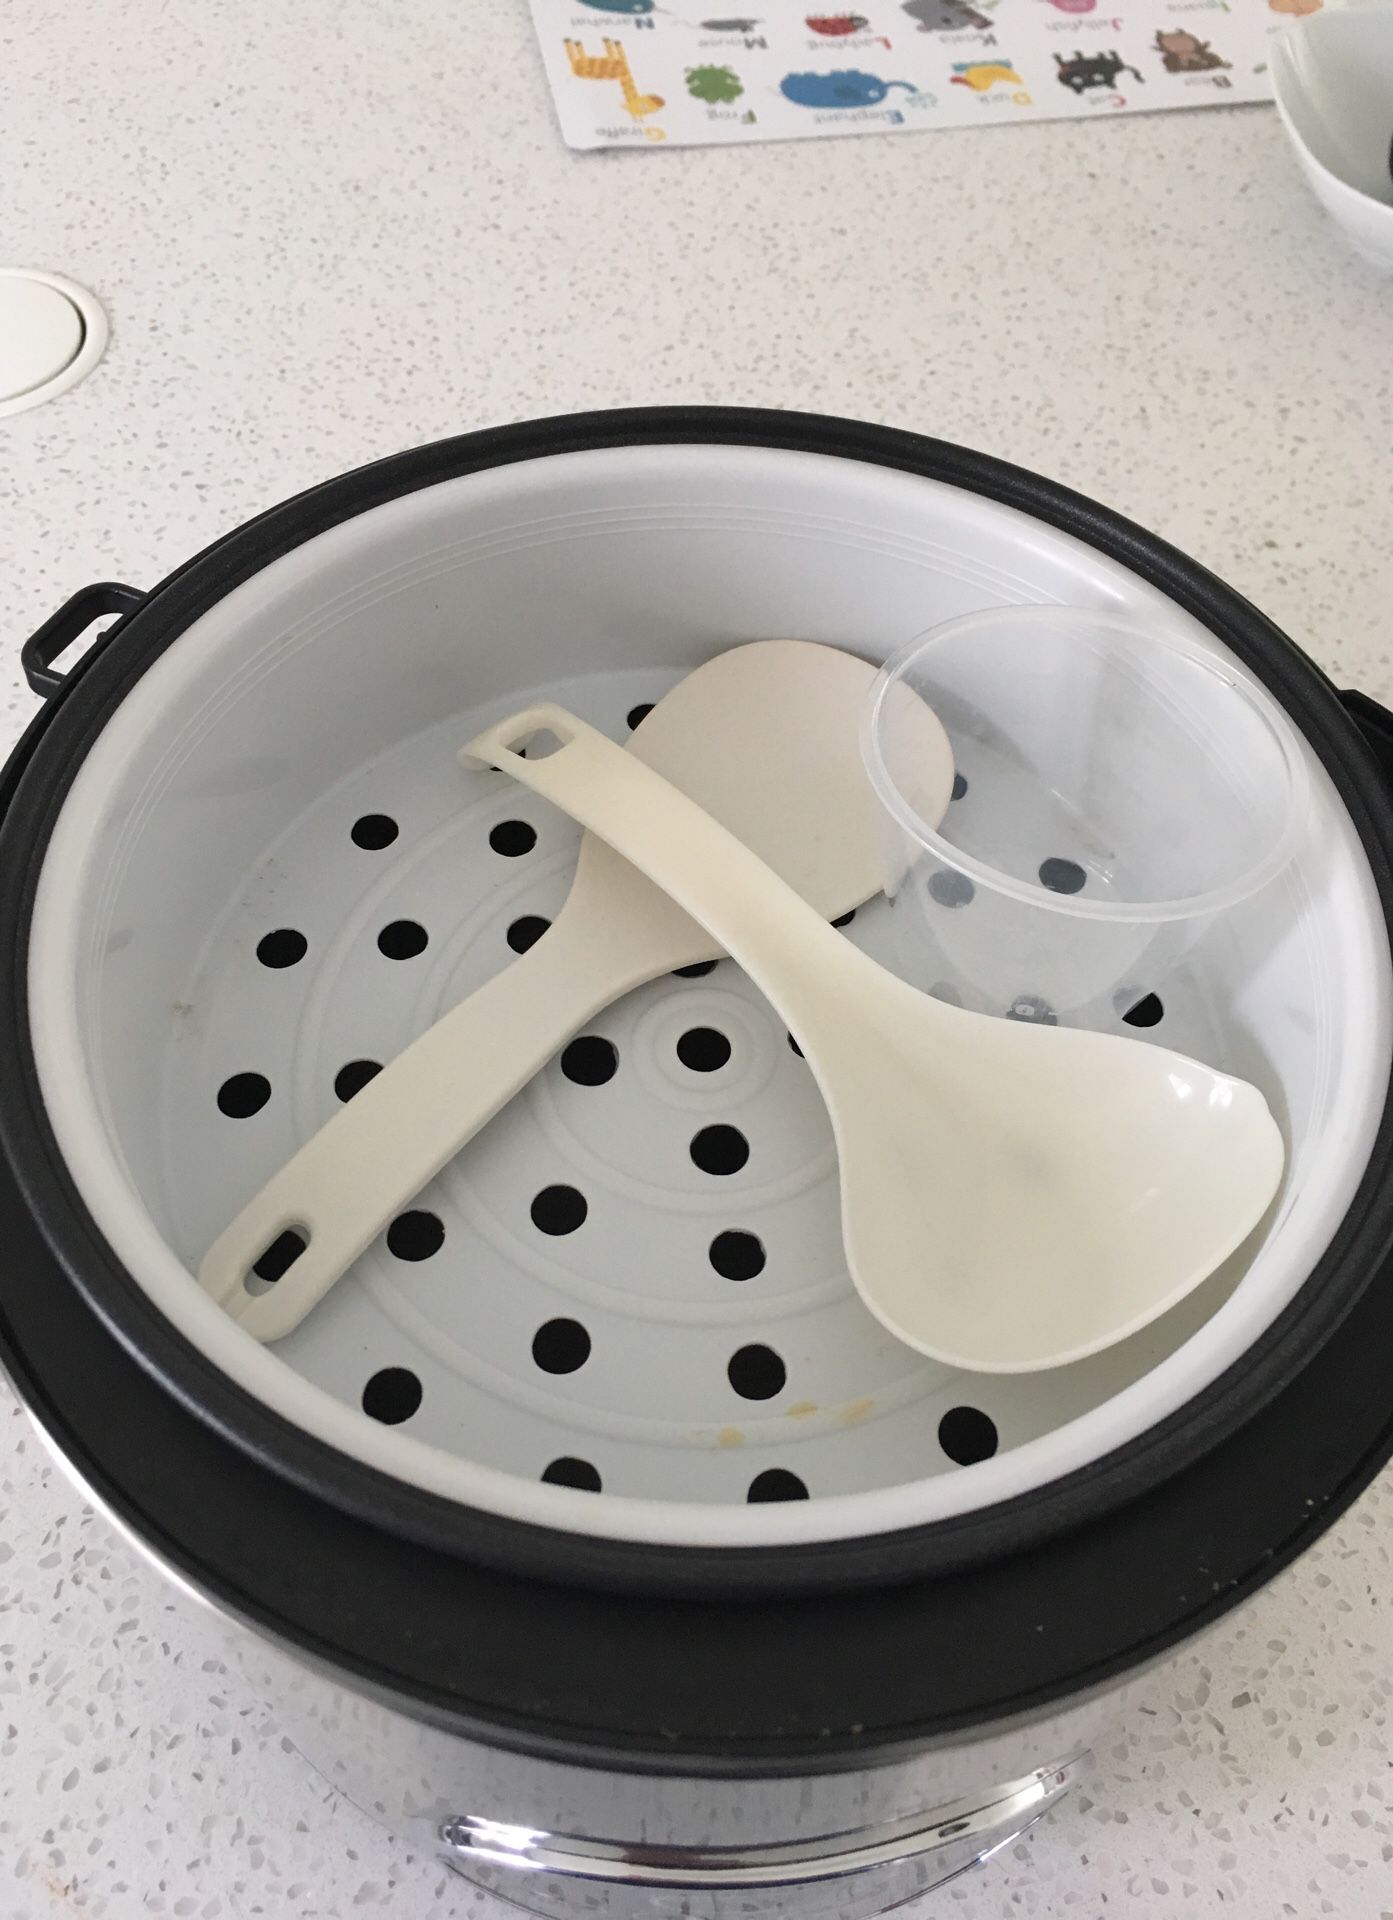 Tatung Rice Cooker for Sale in Anaheim, CA - OfferUp